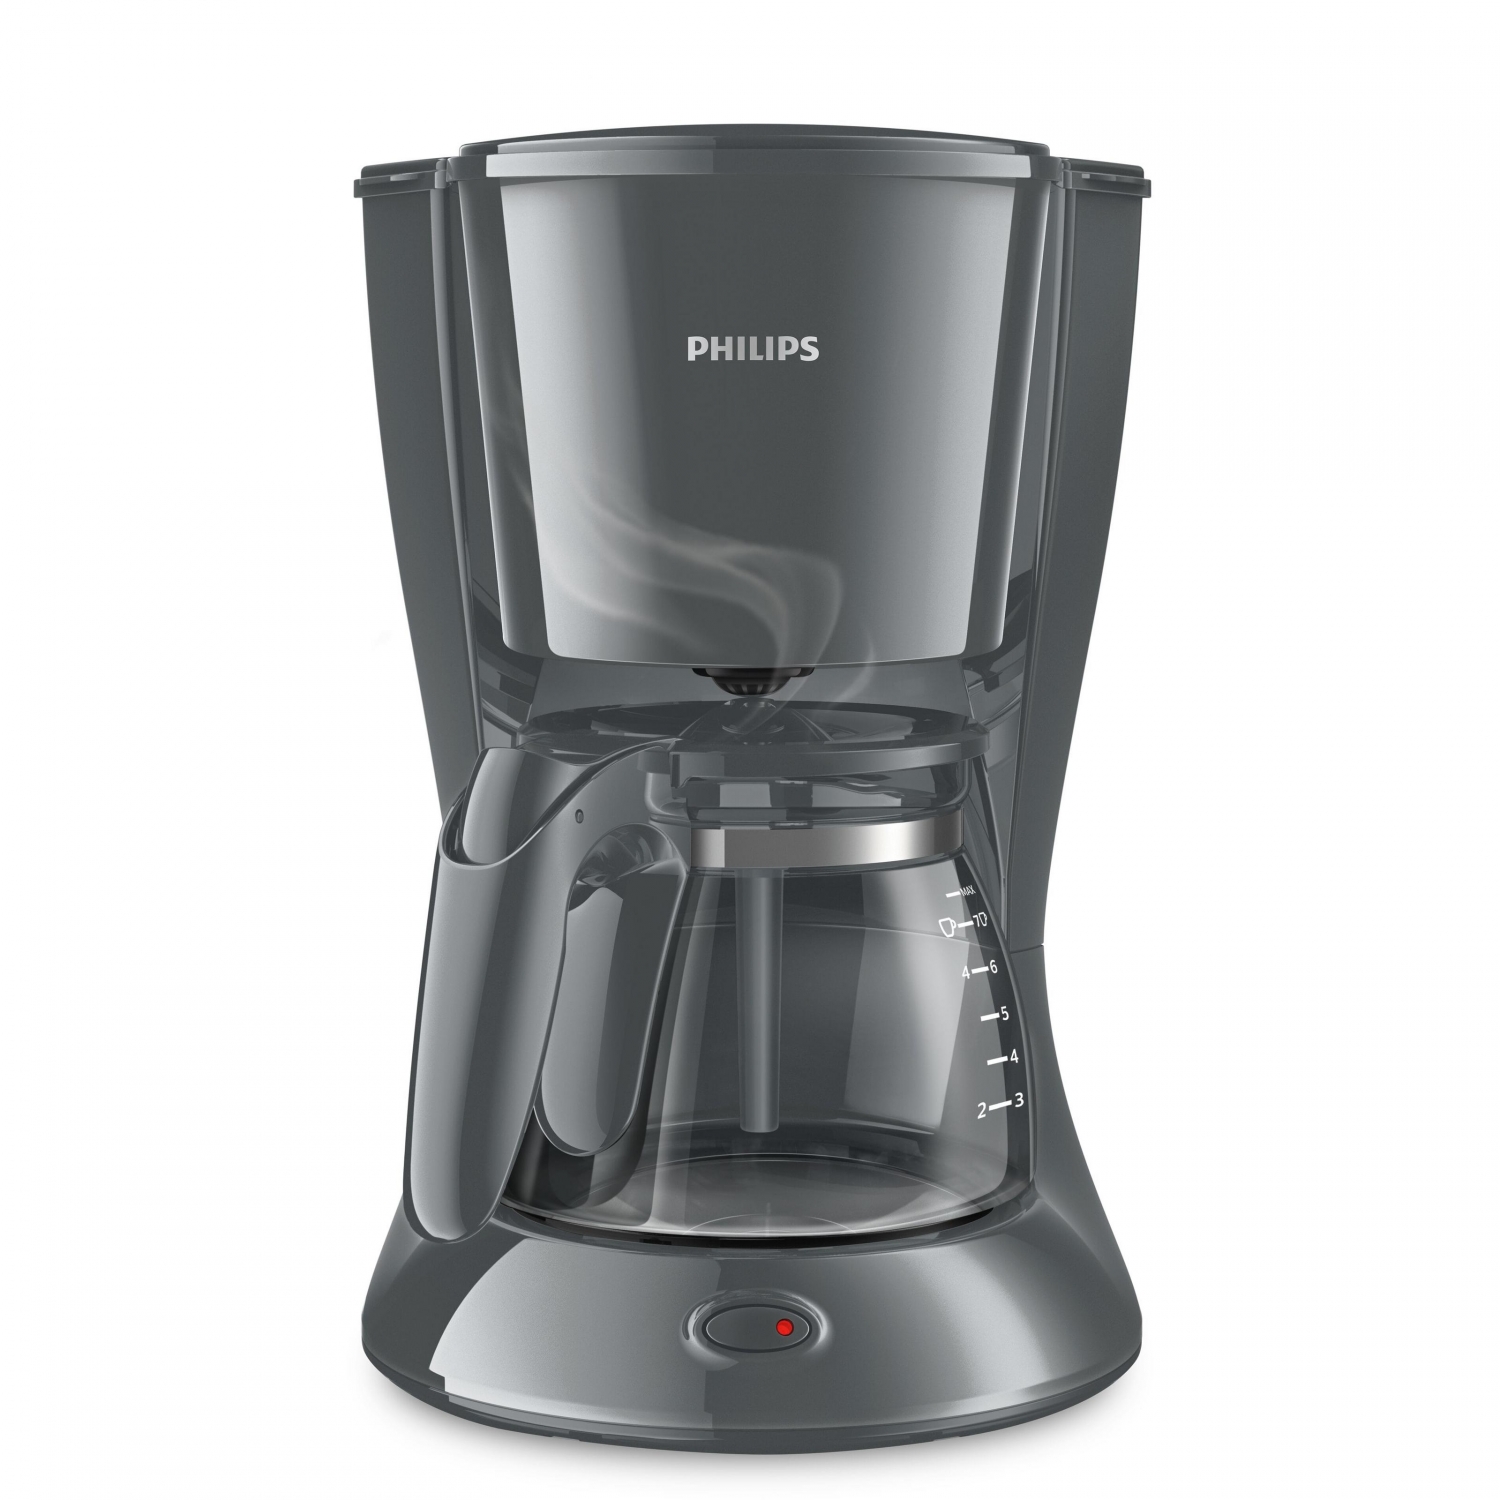 CAFET. PHILIPS HD7432/10 GOTEO 6T GRIS